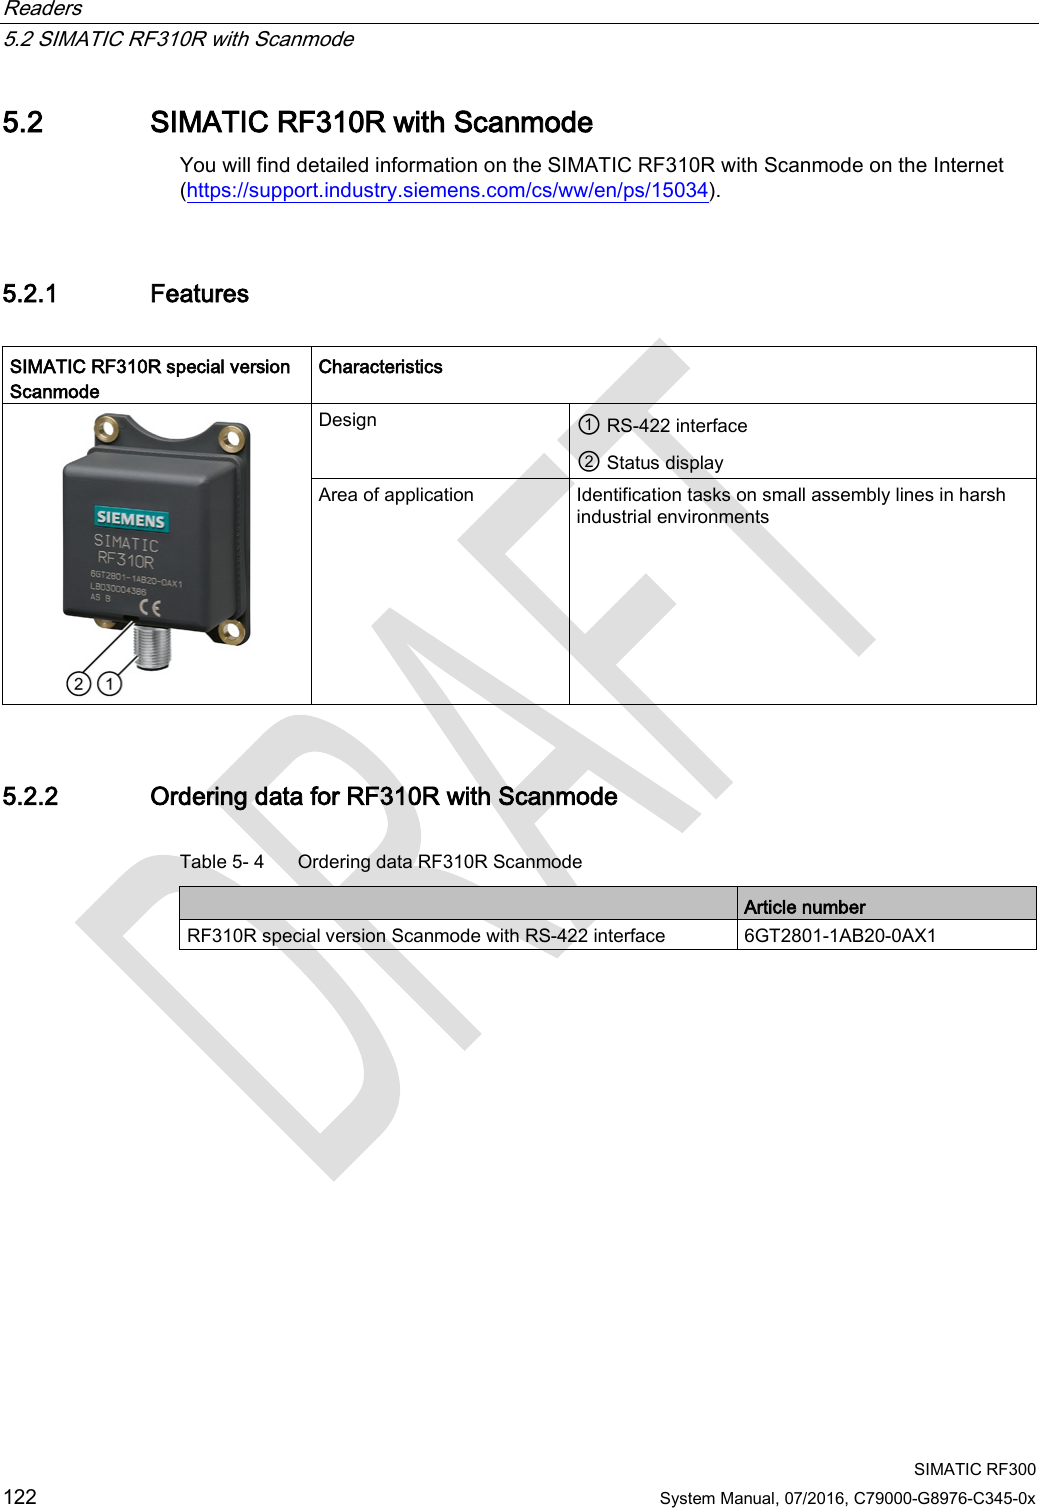 Readers   5.2 SIMATIC RF310R with Scanmode  SIMATIC RF300 122 System Manual, 07/2016, C79000-G8976-C345-0x 5.2 SIMATIC RF310R with Scanmode You will find detailed information on the SIMATIC RF310R with Scanmode on the Internet (https://support.industry.siemens.com/cs/ww/en/ps/15034). 5.2.1 Features  SIMATIC RF310R special version Scanmode  Characteristics  Design ① RS-422 interface ② Status display Area of application Identification tasks on small assembly lines in harsh industrial environments 5.2.2 Ordering data for RF310R with Scanmode Table 5- 4  Ordering data RF310R Scanmode  Article number RF310R special version Scanmode with RS-422 interface 6GT2801-1AB20-0AX1 